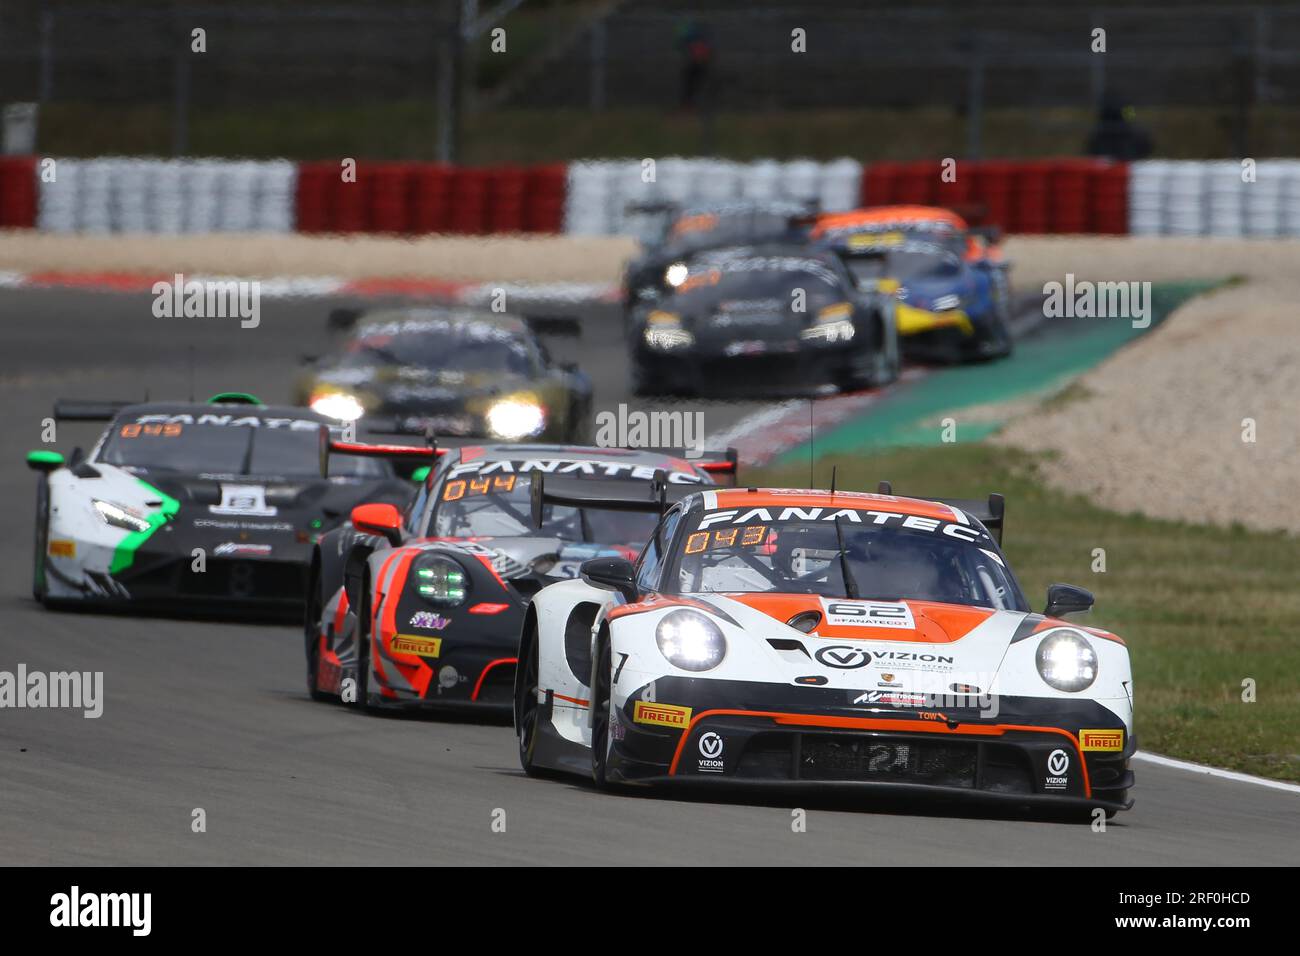 Nuerburg, Germany. 30th July, 2023. # 62, Nurburg, Germany, Sunday 30th of JULY 2023: Derek PIERCE, Kiern JEWISS, Andrew MEYRICK Team Parker Racing, Porsche 911 GT3 R (992) car, during the race of the Fanatec GT World Challenge Endurance Cup. The Team Parker Racing races in the in the Fanatec GT World Challenge Endurance Cup, fee liable image, Photo copyright © ATP Geert FRANQUET (FRANQUET Geert /ATP/SPP) Credit: SPP Sport Press Photo. /Alamy Live News Stock Photo